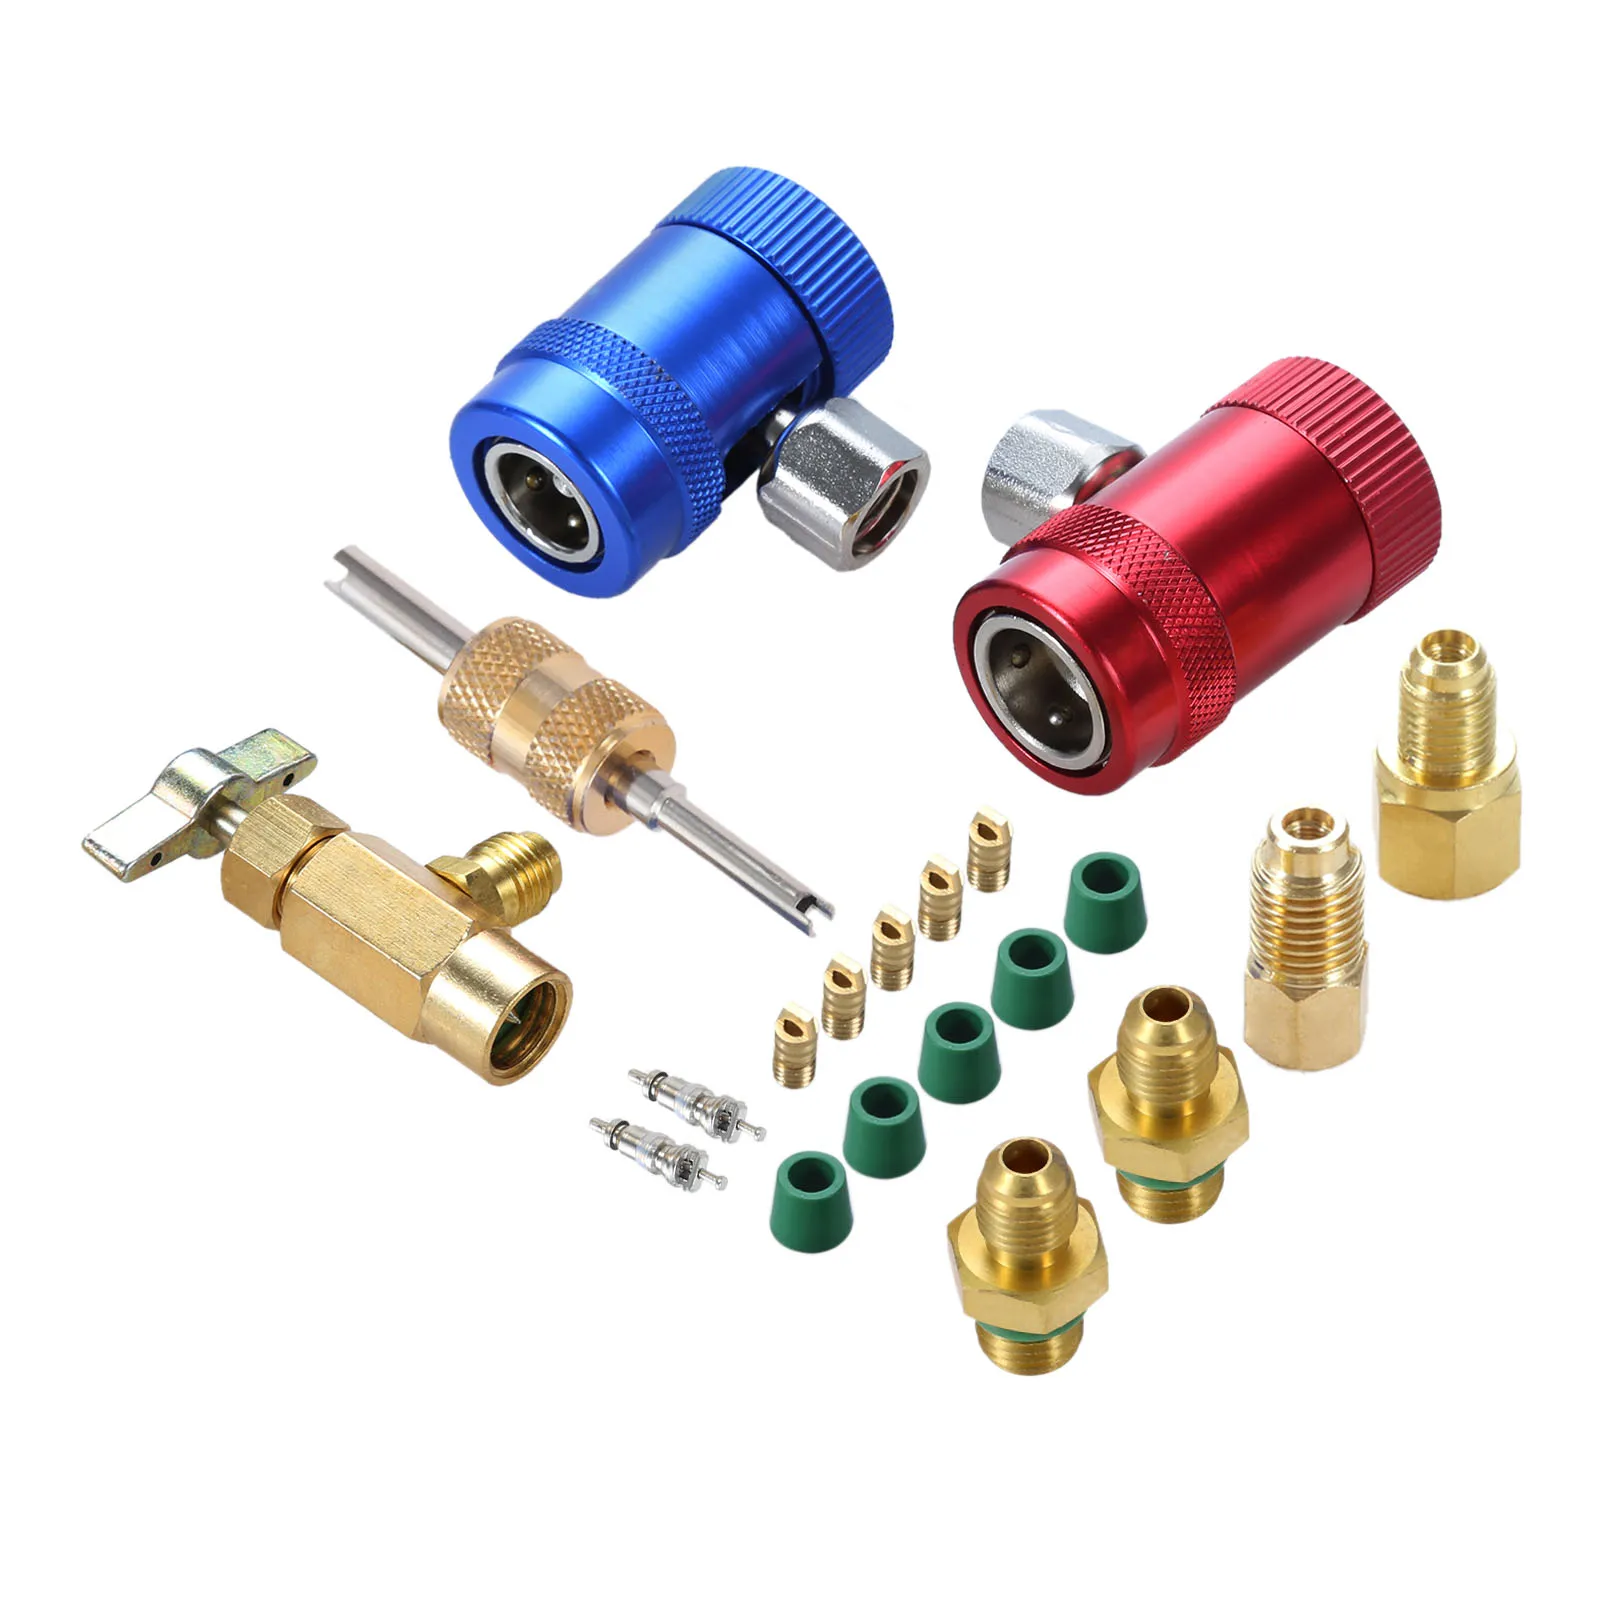 AC High Low Side Manual Quick Coupler Connector,R1234YF Can Tap with R12  R22 to R134A Adapter,Valve Core Remover,Thimble,Gaskets - AliExpress